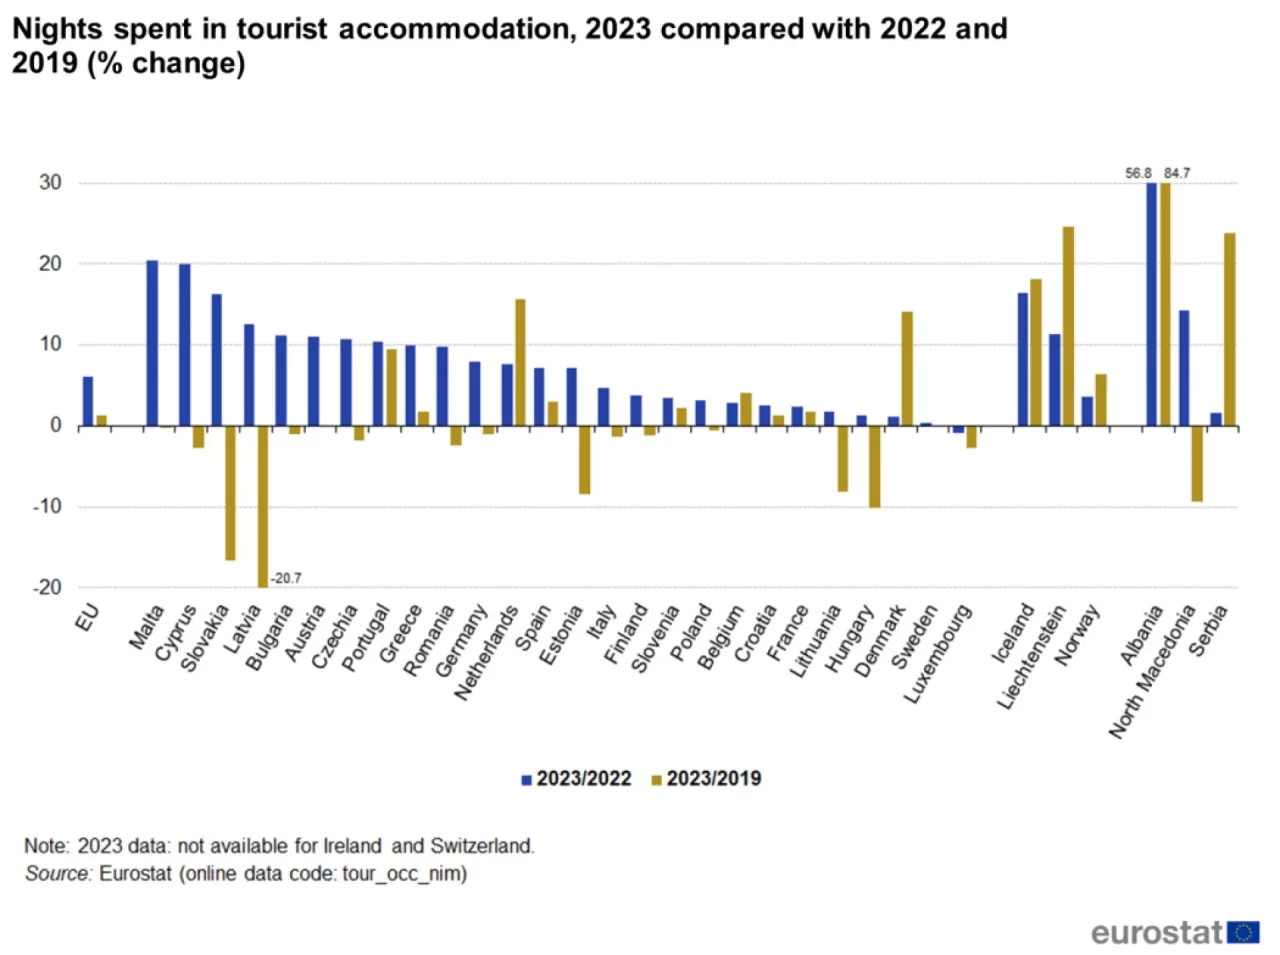 1050px-figure_2_nights_spent_in_tourist_accommodation-_2023_compared_with_2022_and_2019_-_change-.png-1280x955.webp